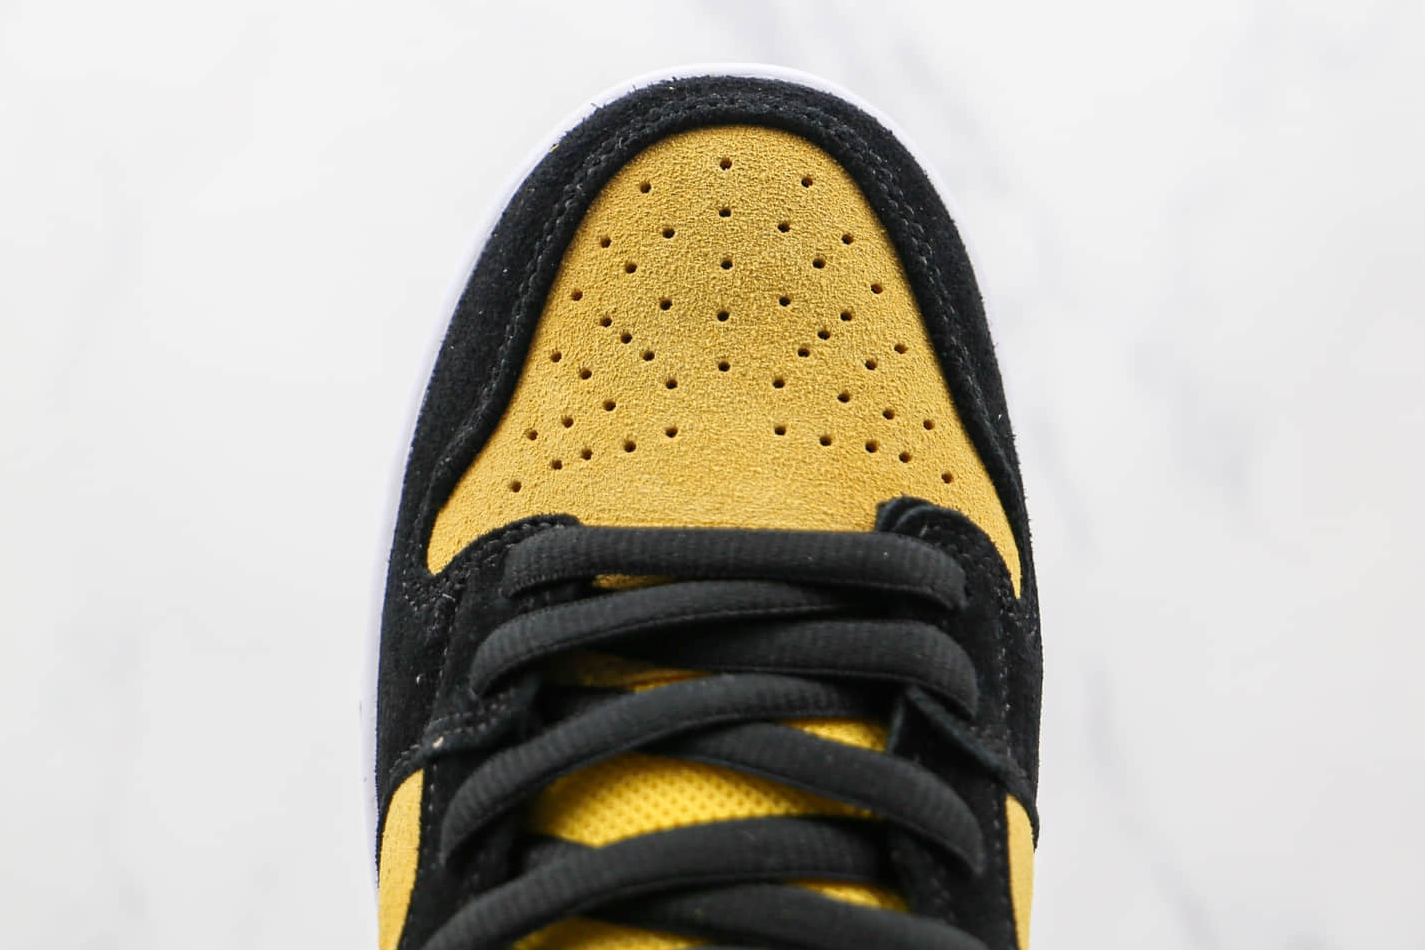 Nike Dunk High Pro SB 'Reverse Goldenrod' DB1640-001 | Limited Edition Skateboarding Sneakers